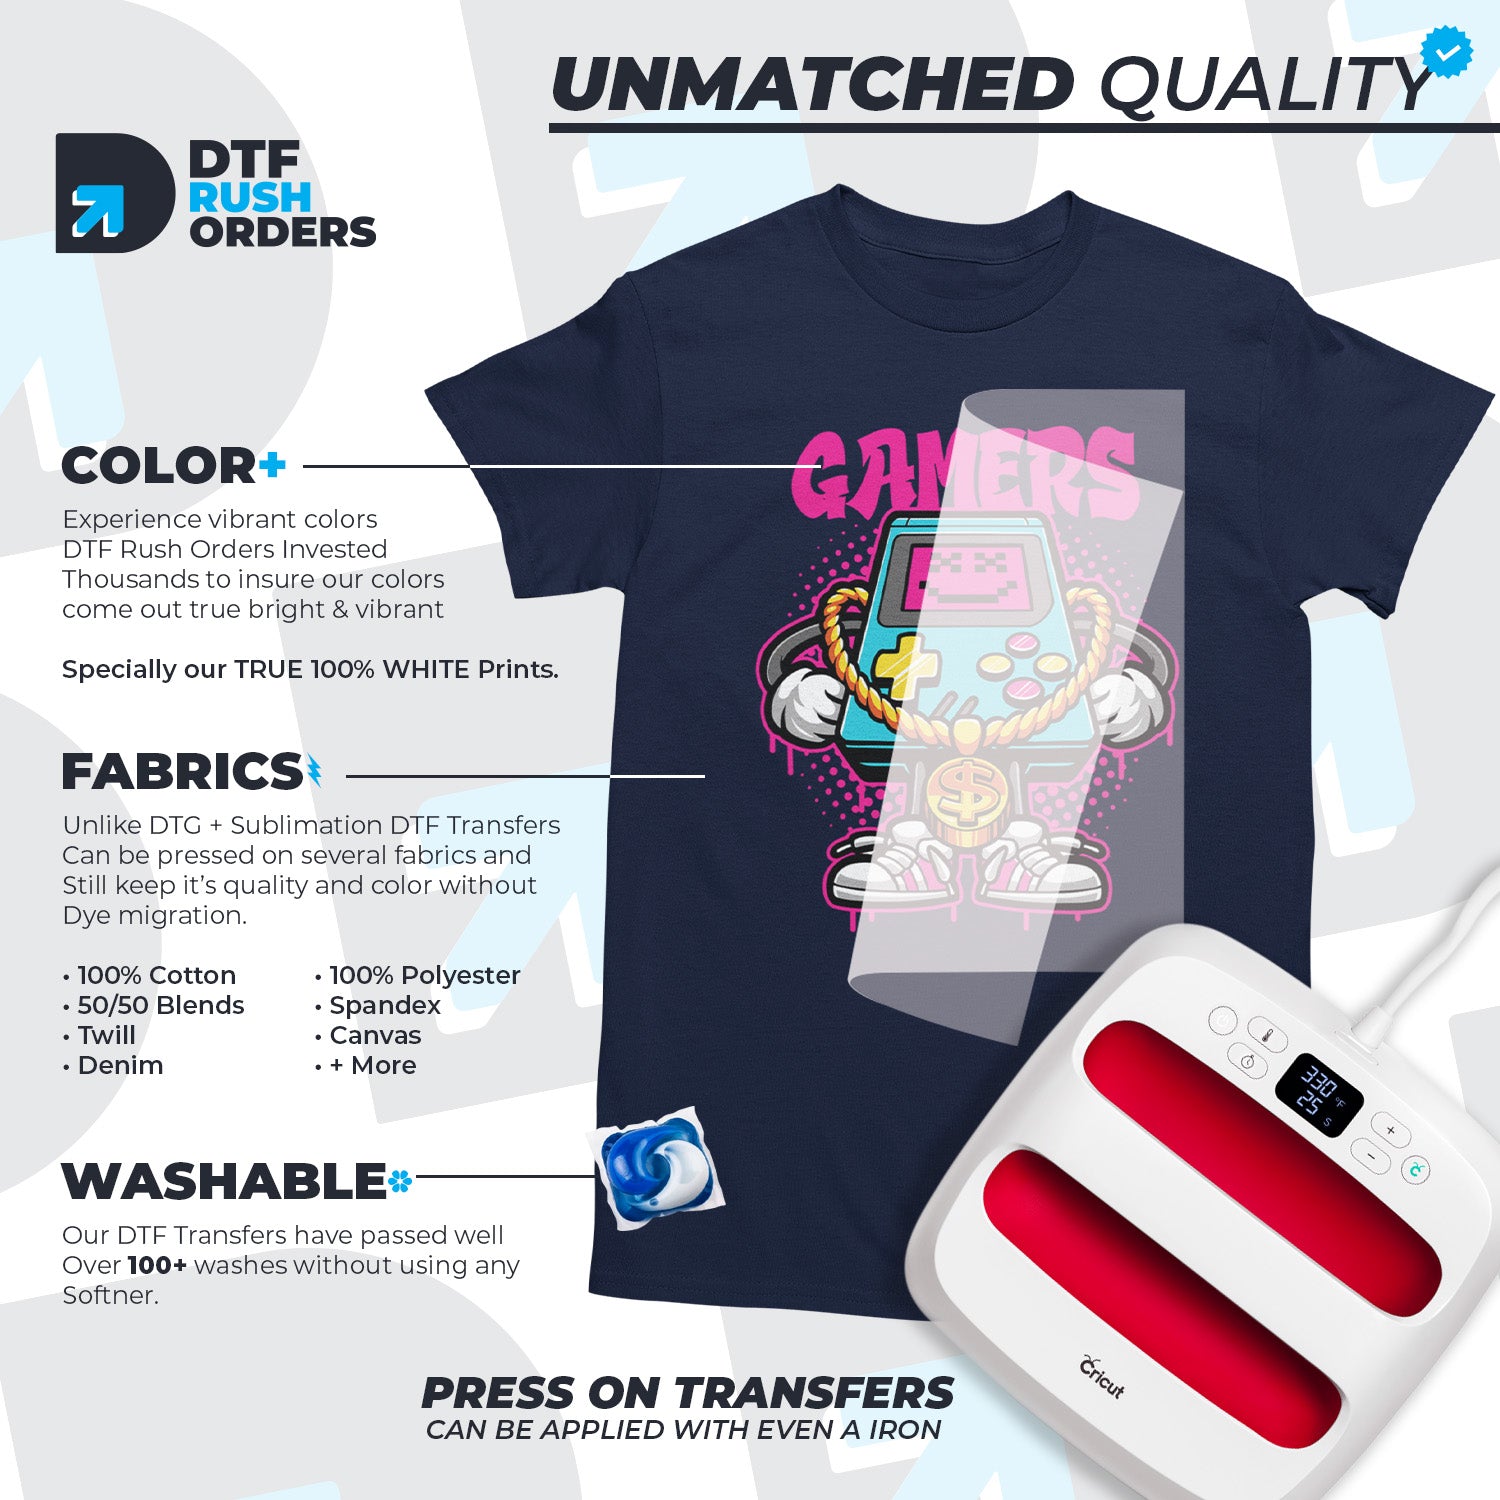 DTF Transfers Trusted by thousands for its vibrant colors and quality